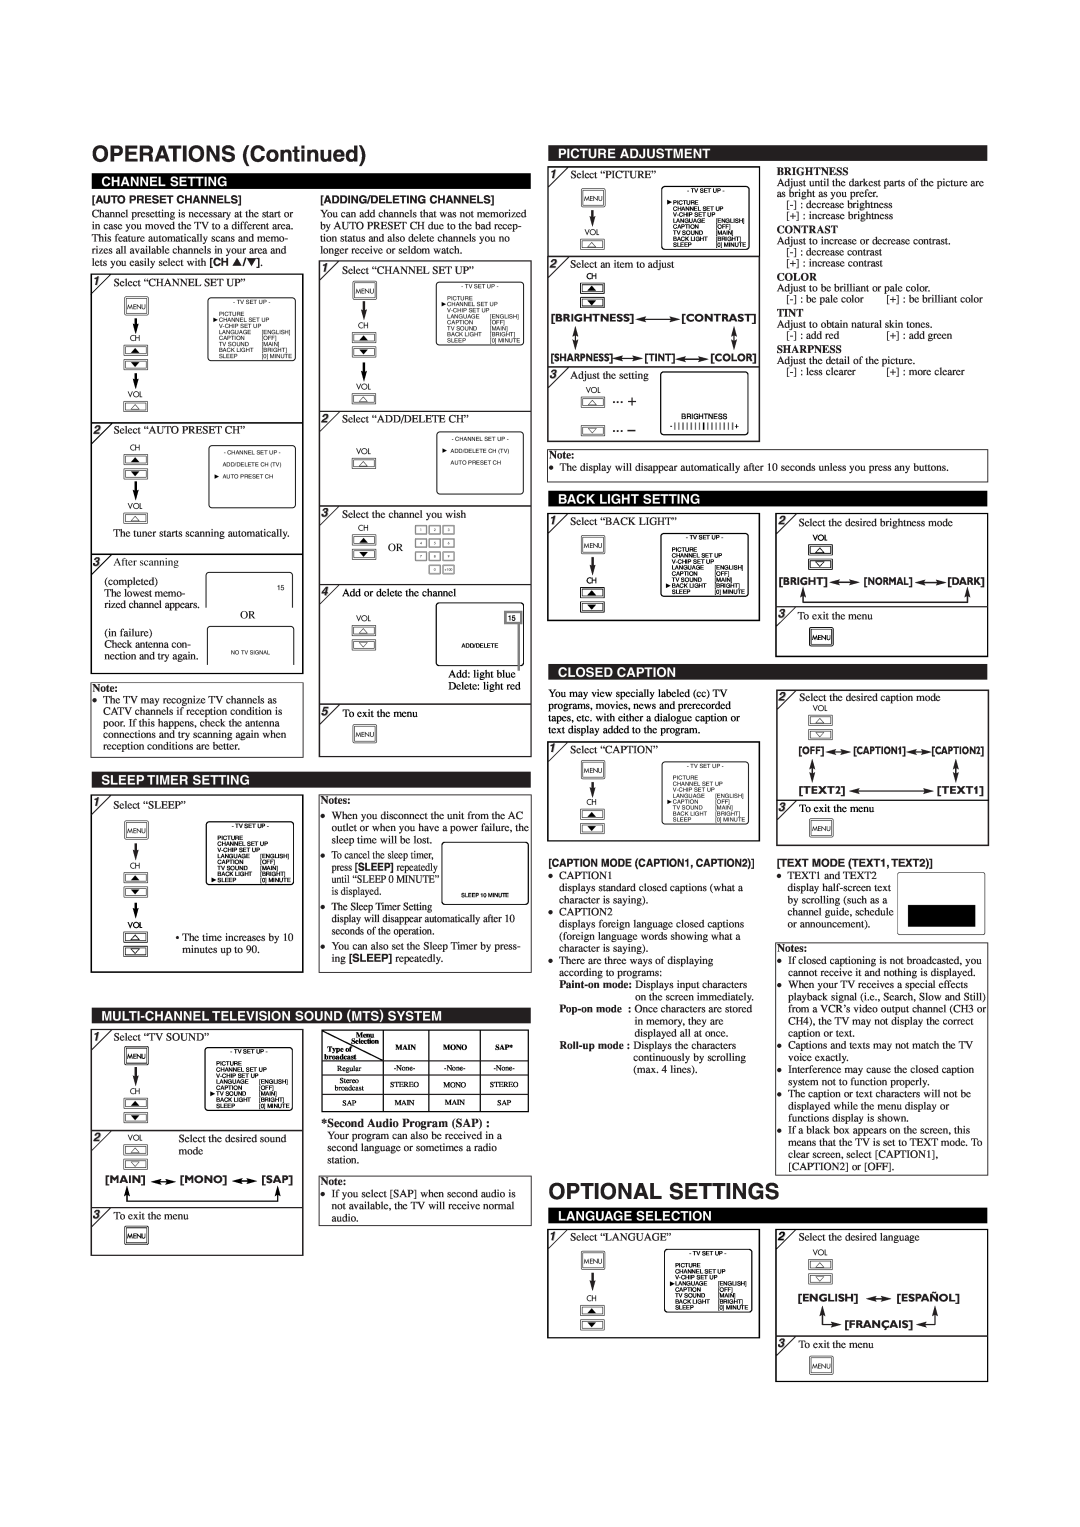 Sylvania 6620LG OPERATIONS Continued, Optional Settings, m ... +, Picture Adjustment, Channel Setting, Back Light Setting 